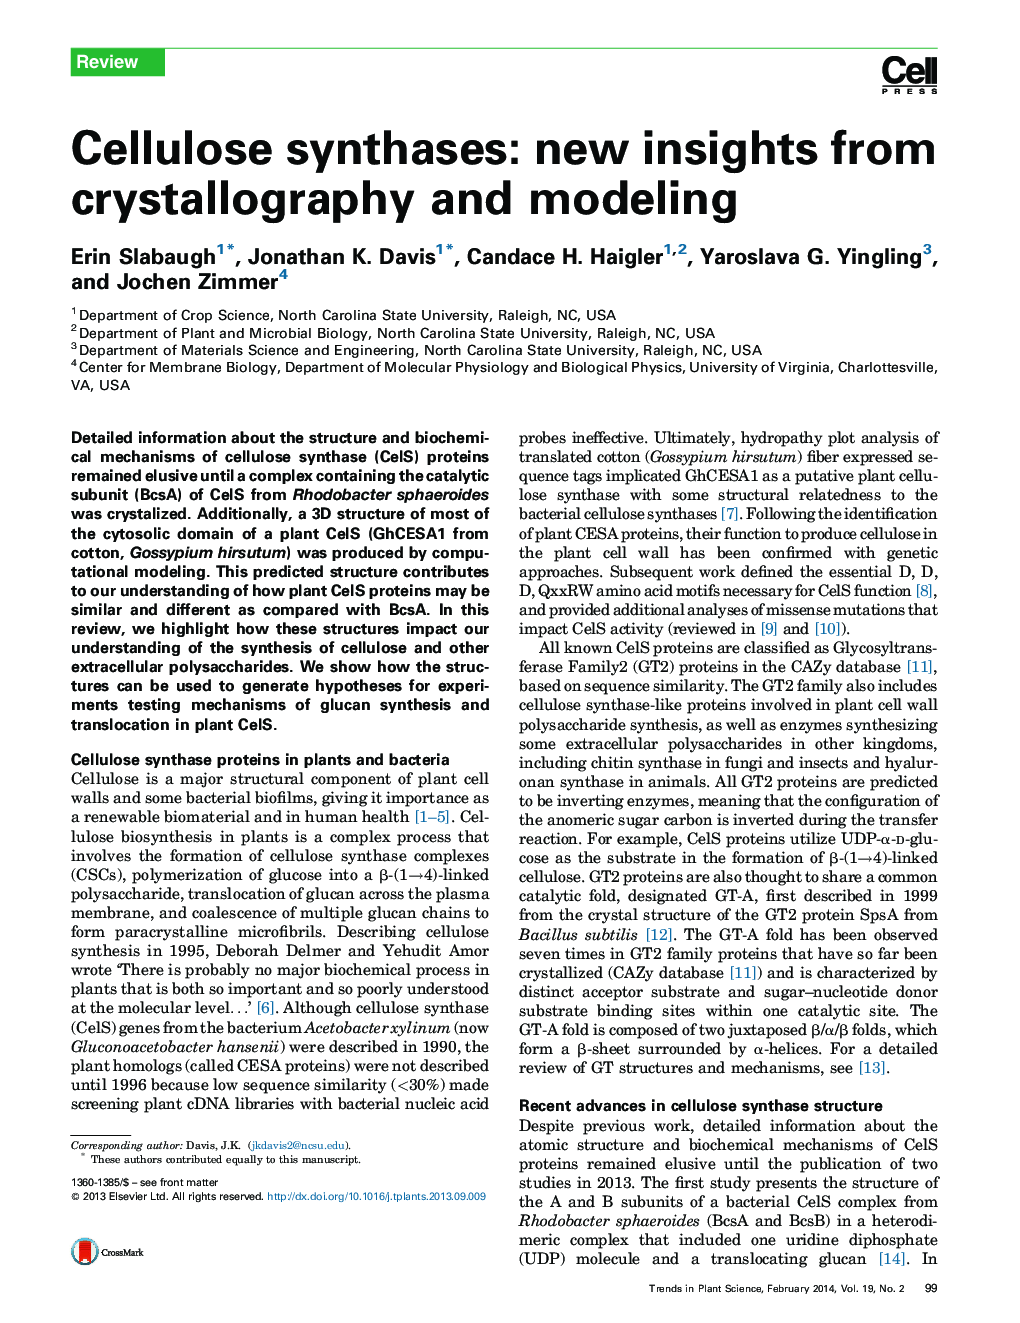 Cellulose synthases: new insights from crystallography and modeling